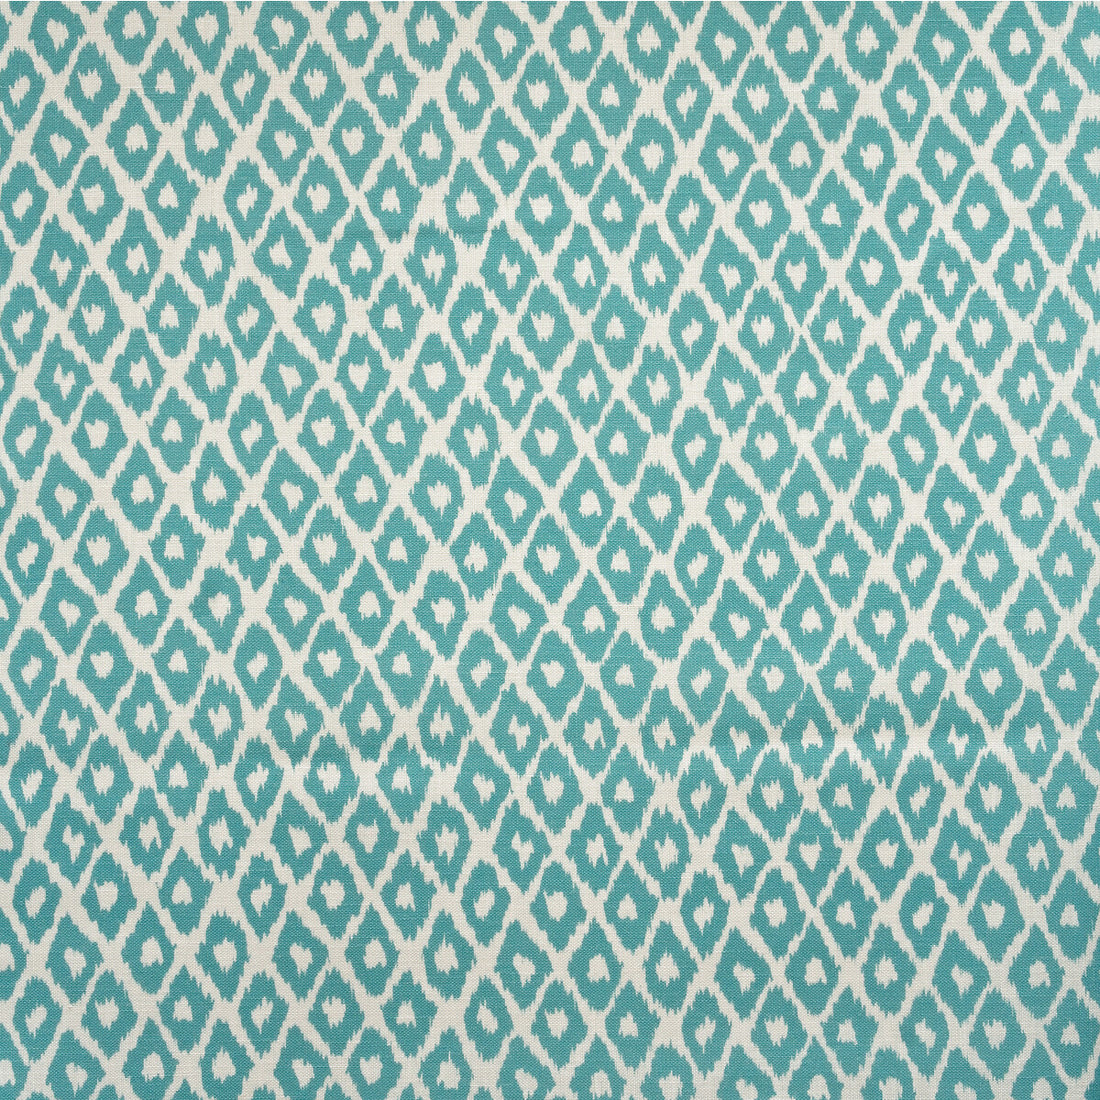 Gypsum Outdoor fabric in lagoon color - pattern AM100349.13.0 - by Kravet Couture in the Andrew Martin The Great Outdoors collection